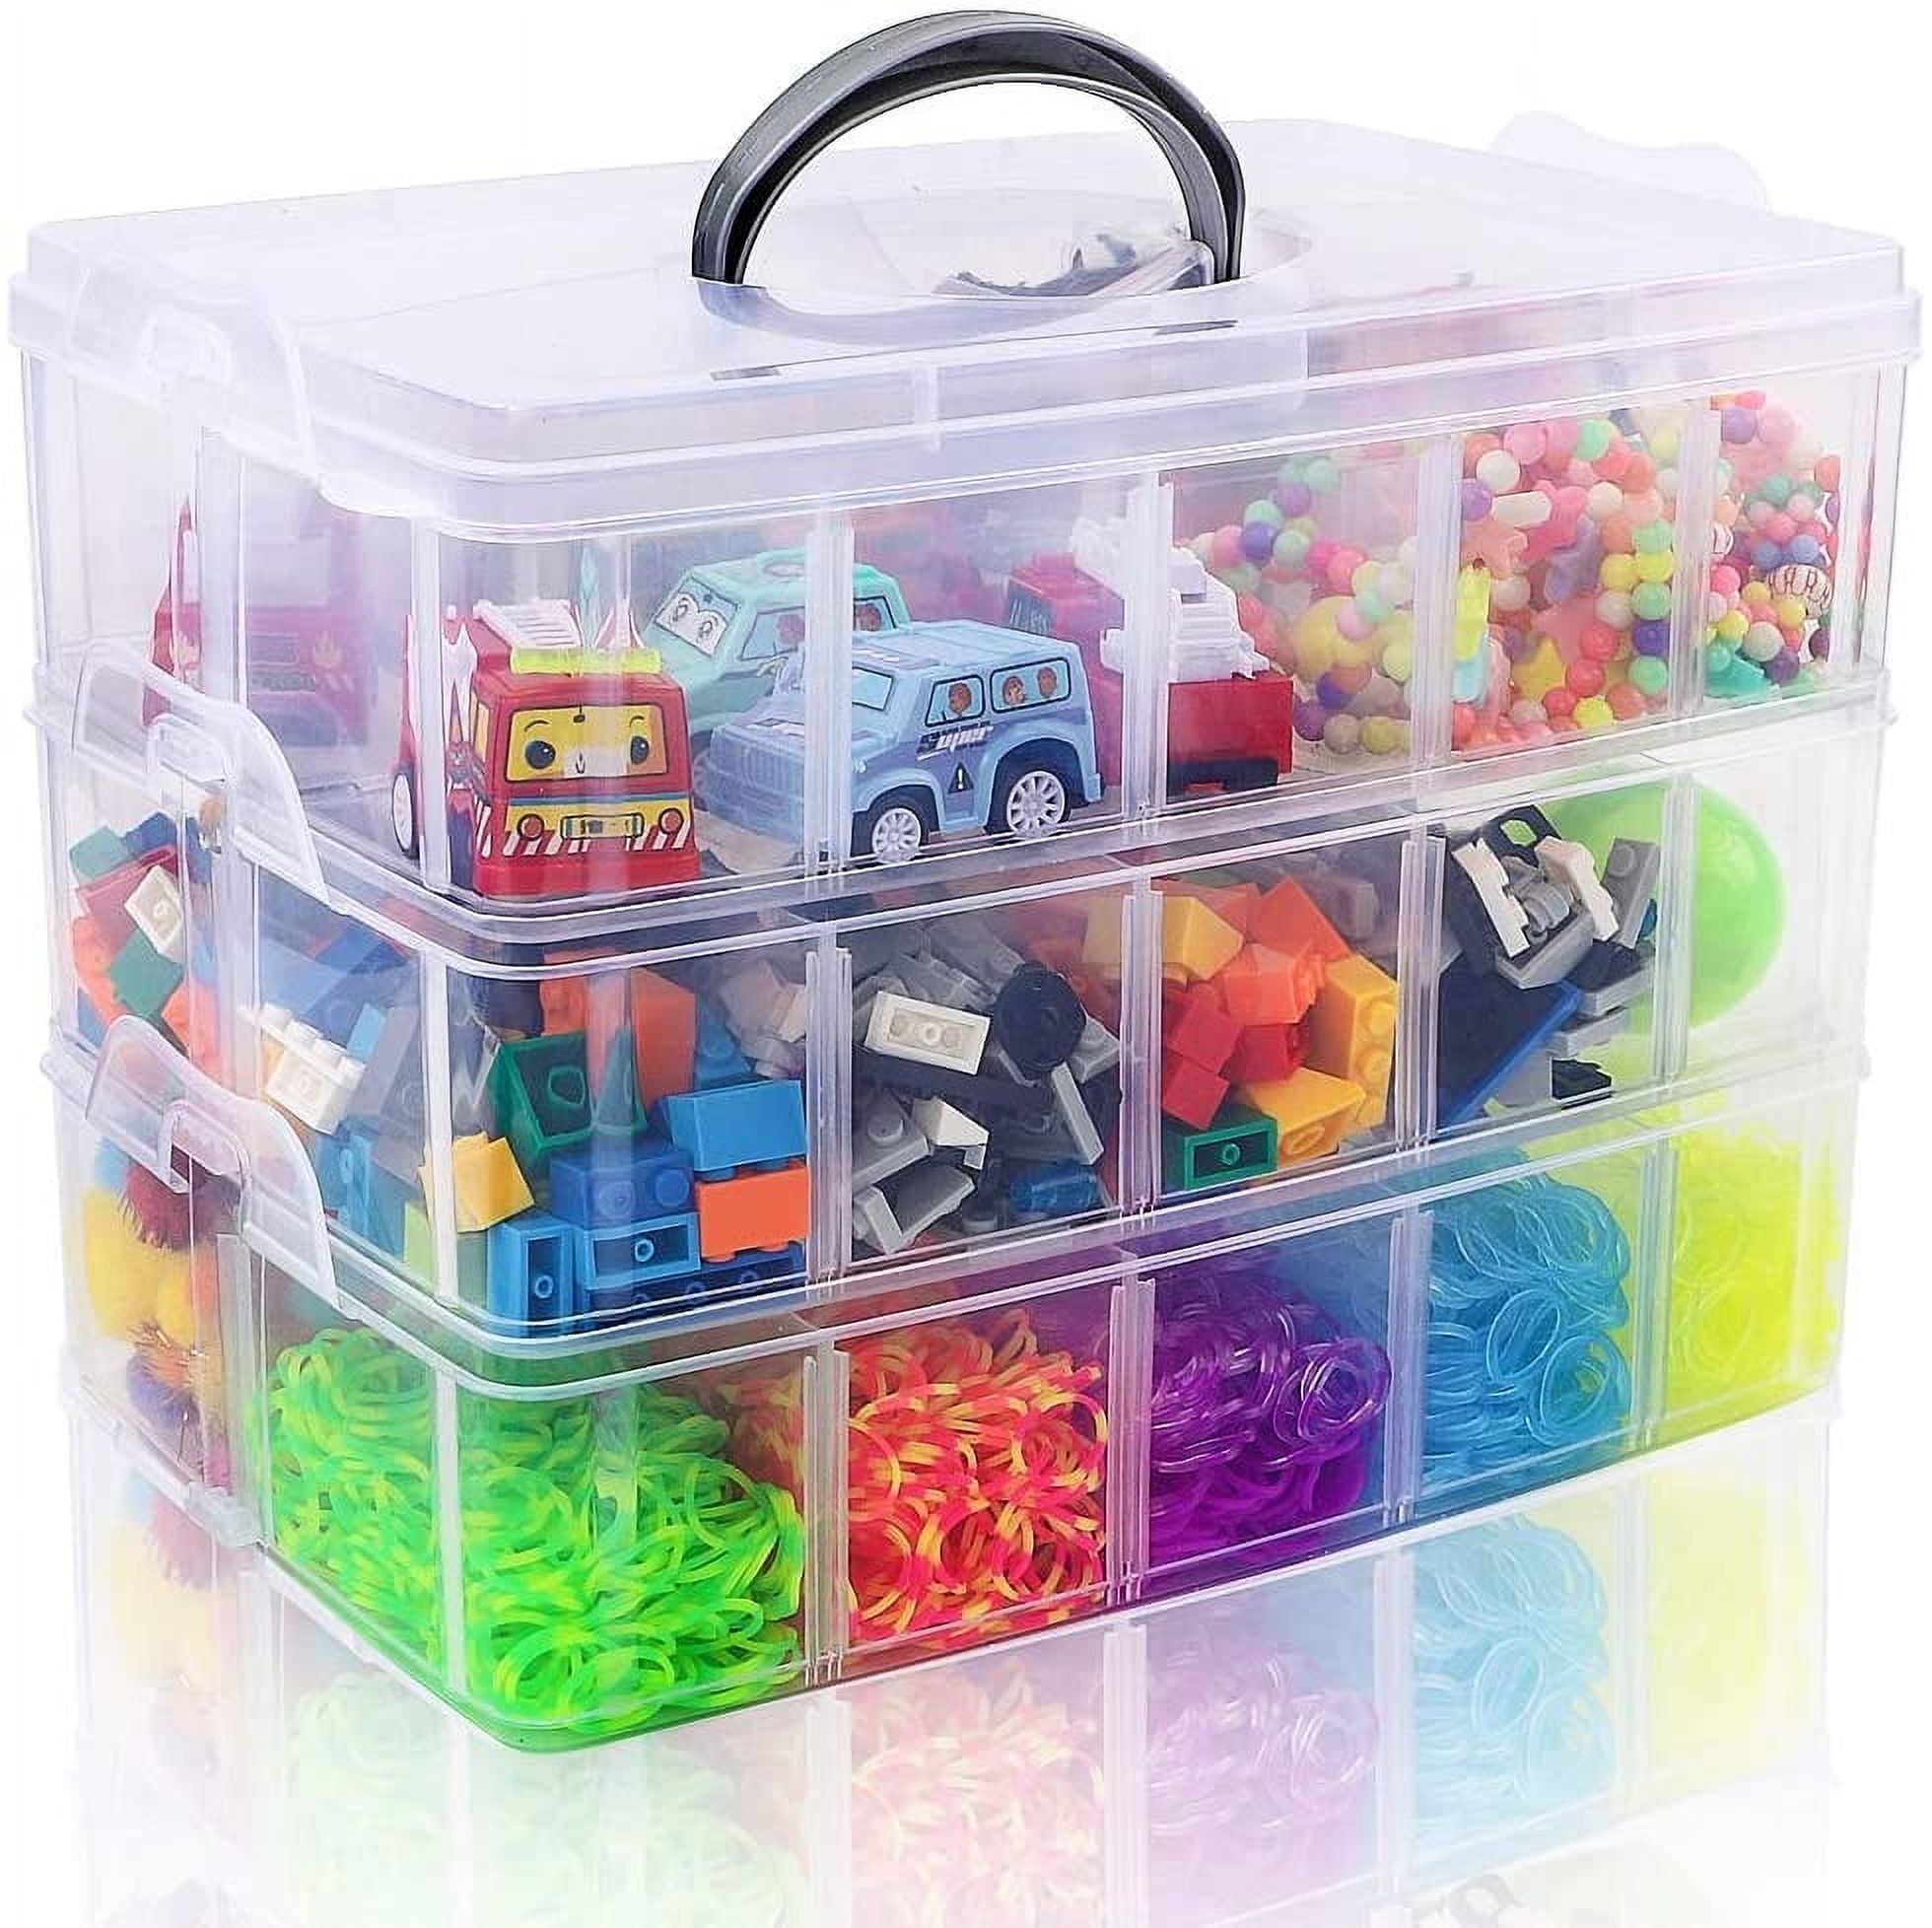 SGHUO 3-Tier Stackable Storage Container Box with 30 Compartments, Plastic Organizer Box for Arts and Crafts, Toy, Fuse Beads, Washi Tapes, 9.5X6.5X7.